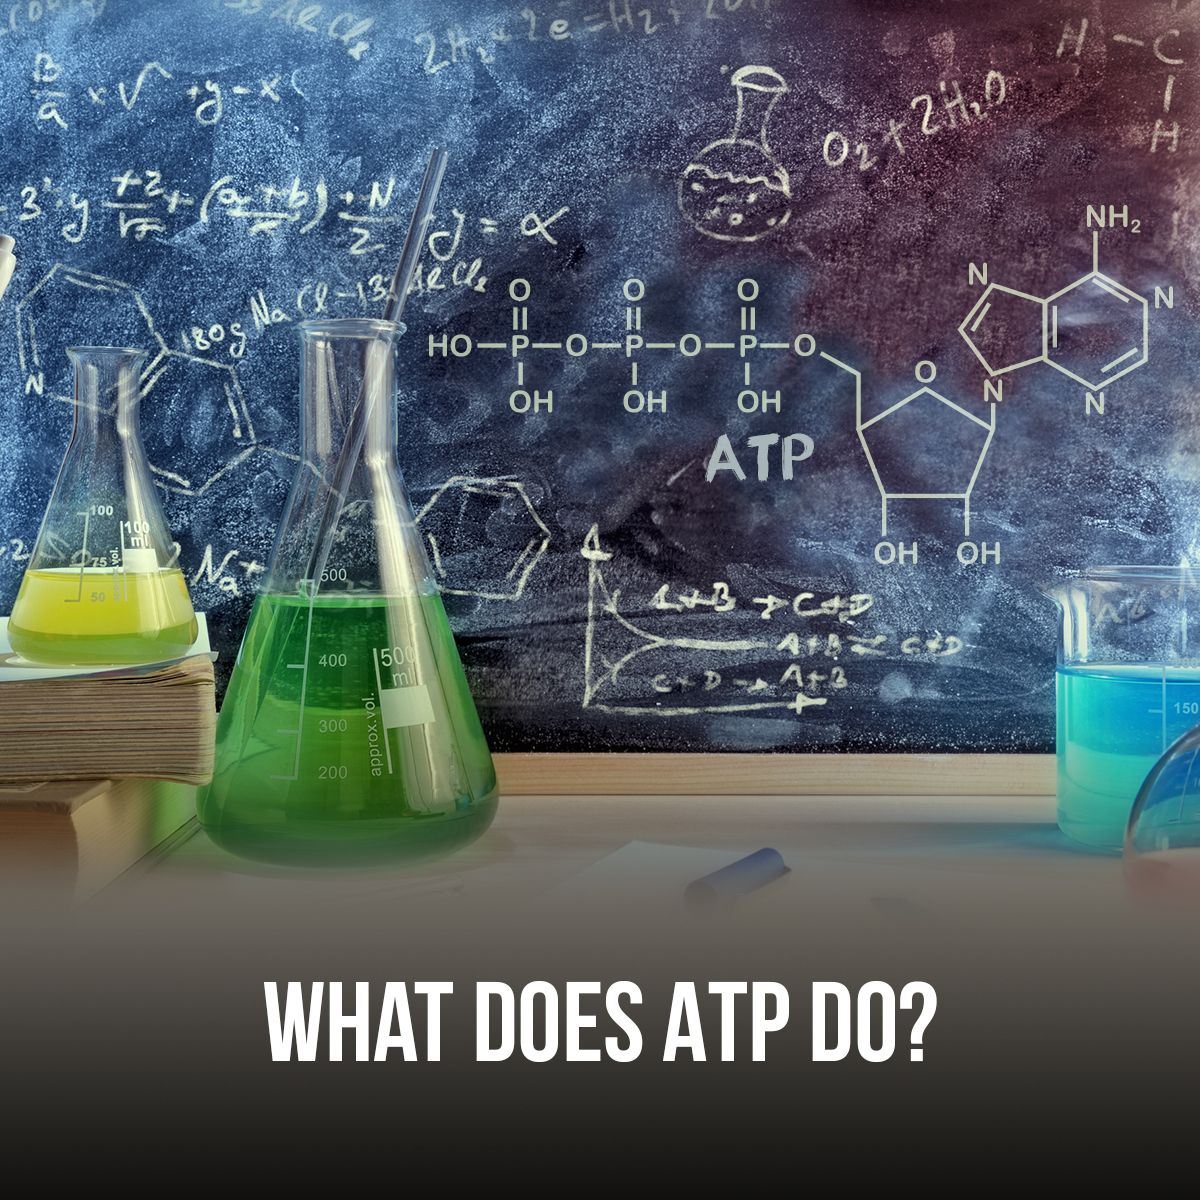 What Does ATP Do?